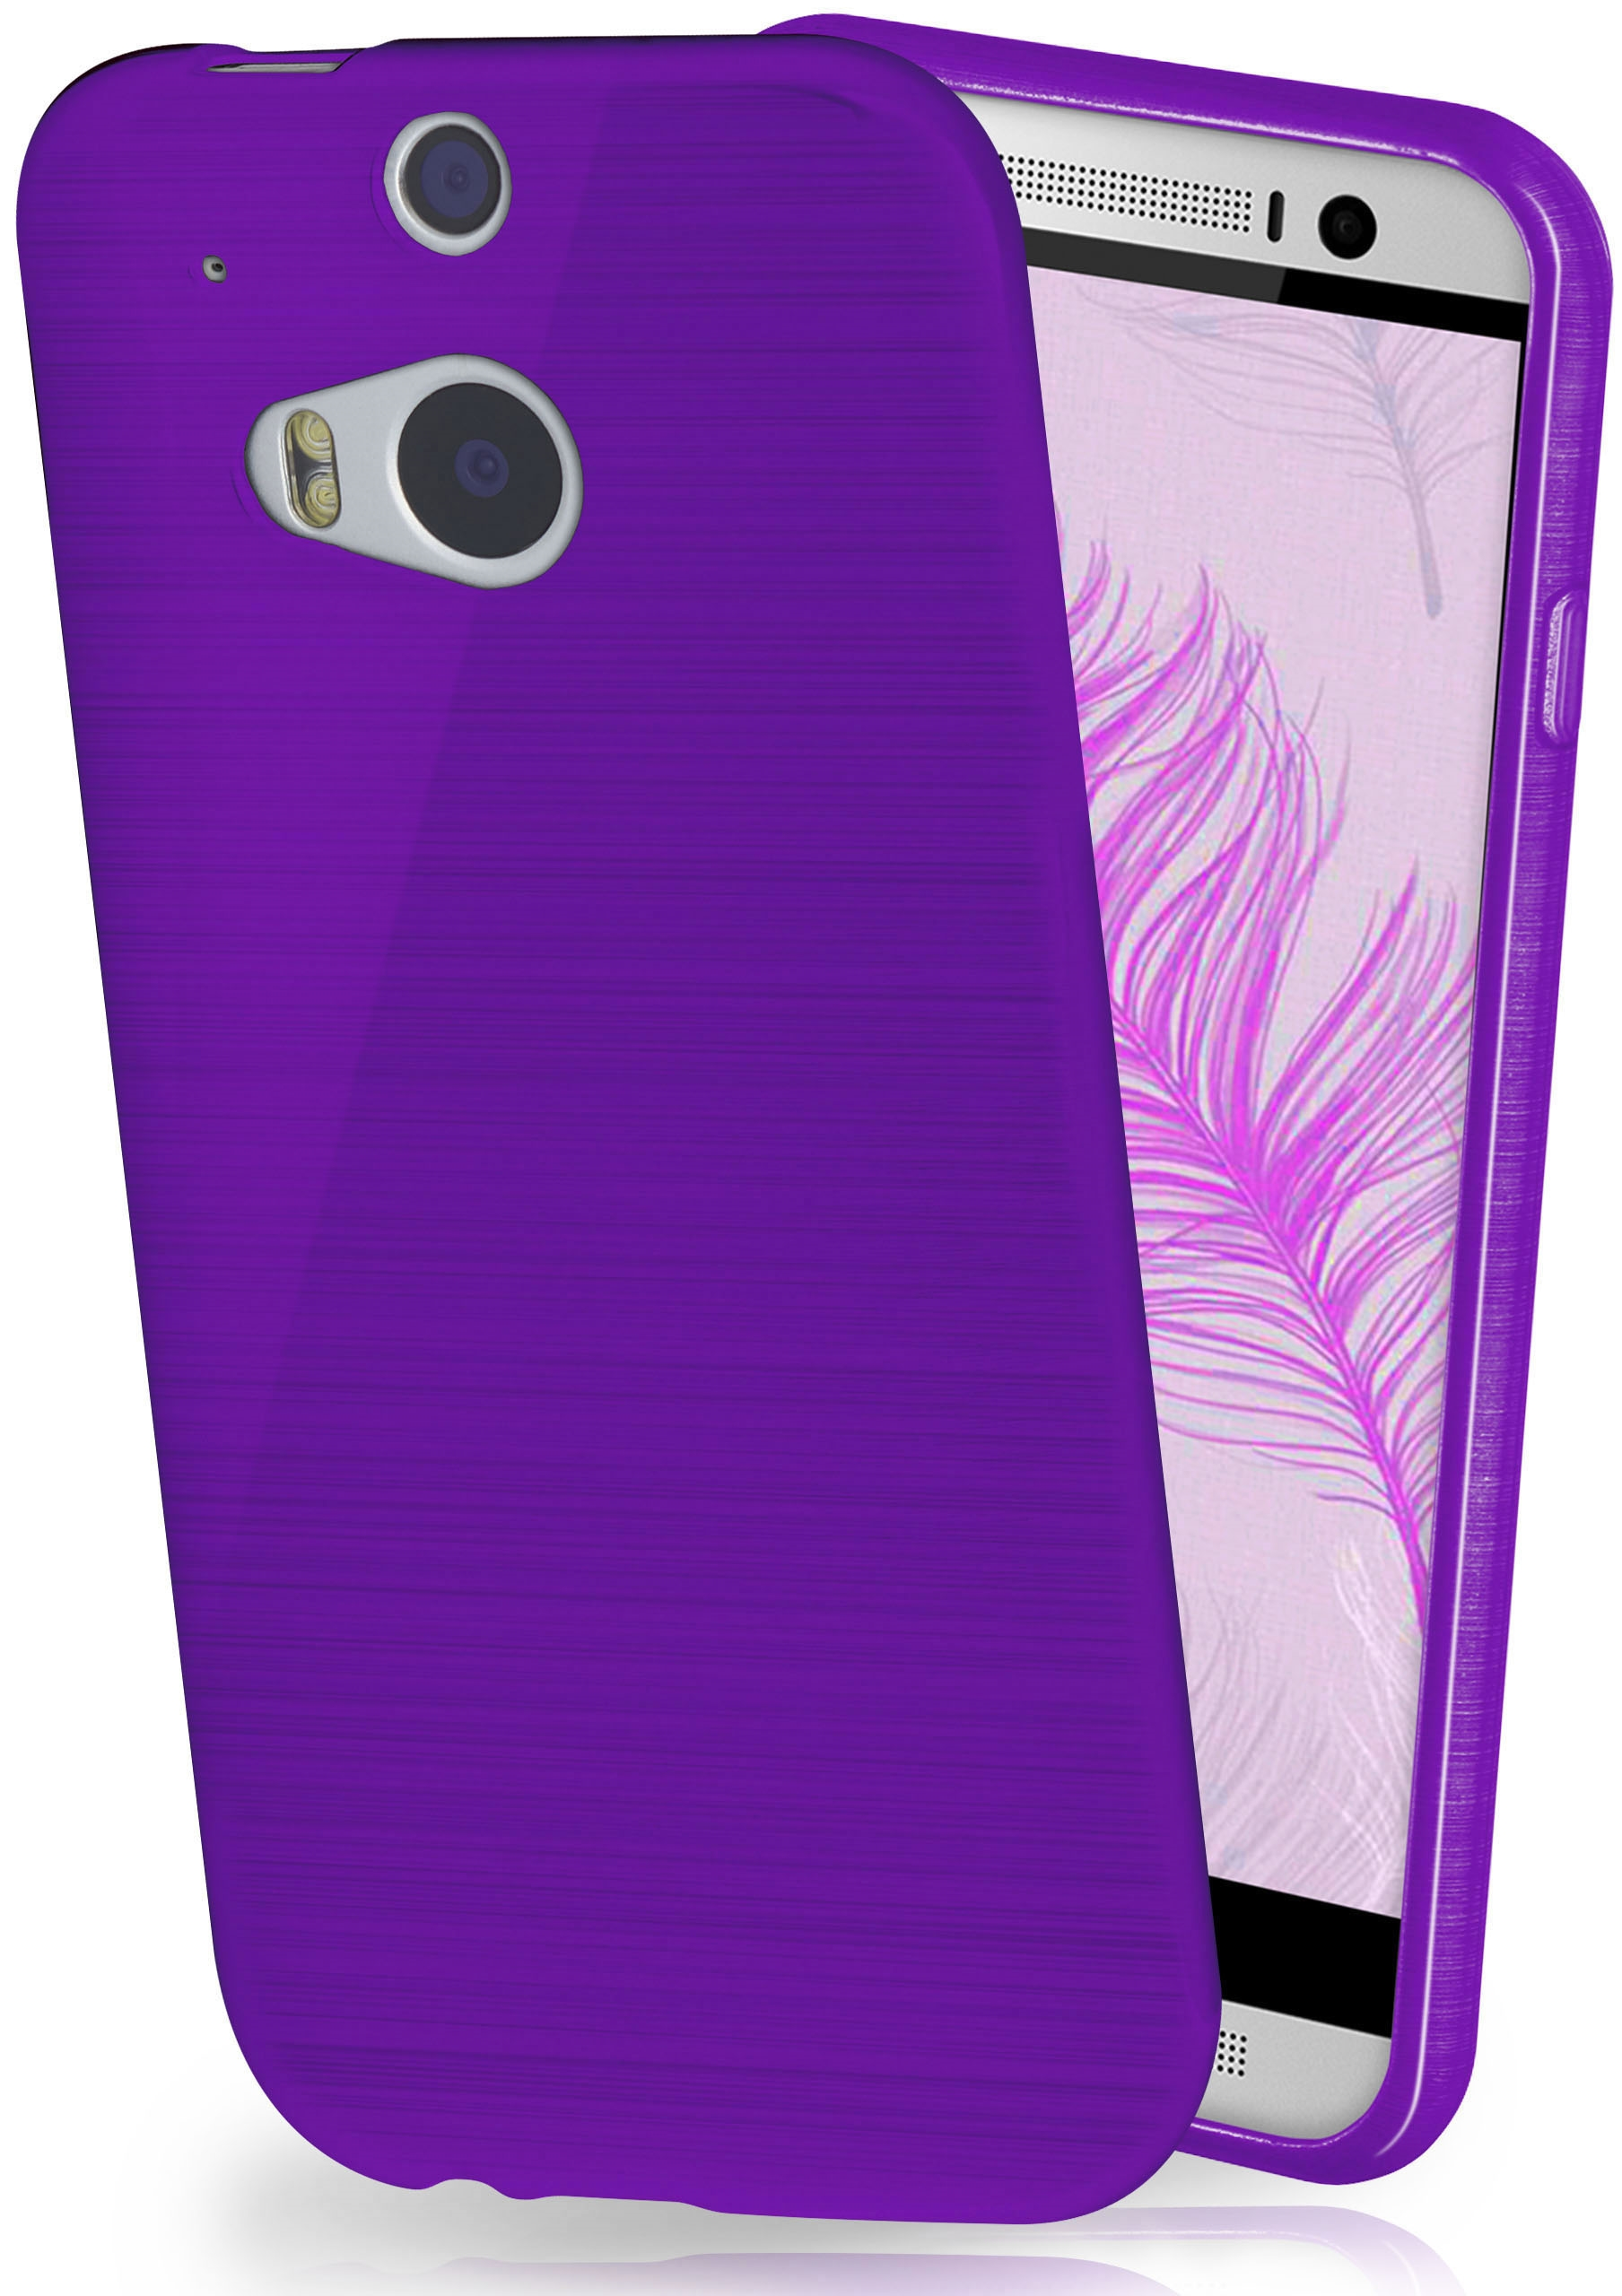 Case, M8s, M8 One MOEX Brushed Purpure-Purple Backcover, HTC, /